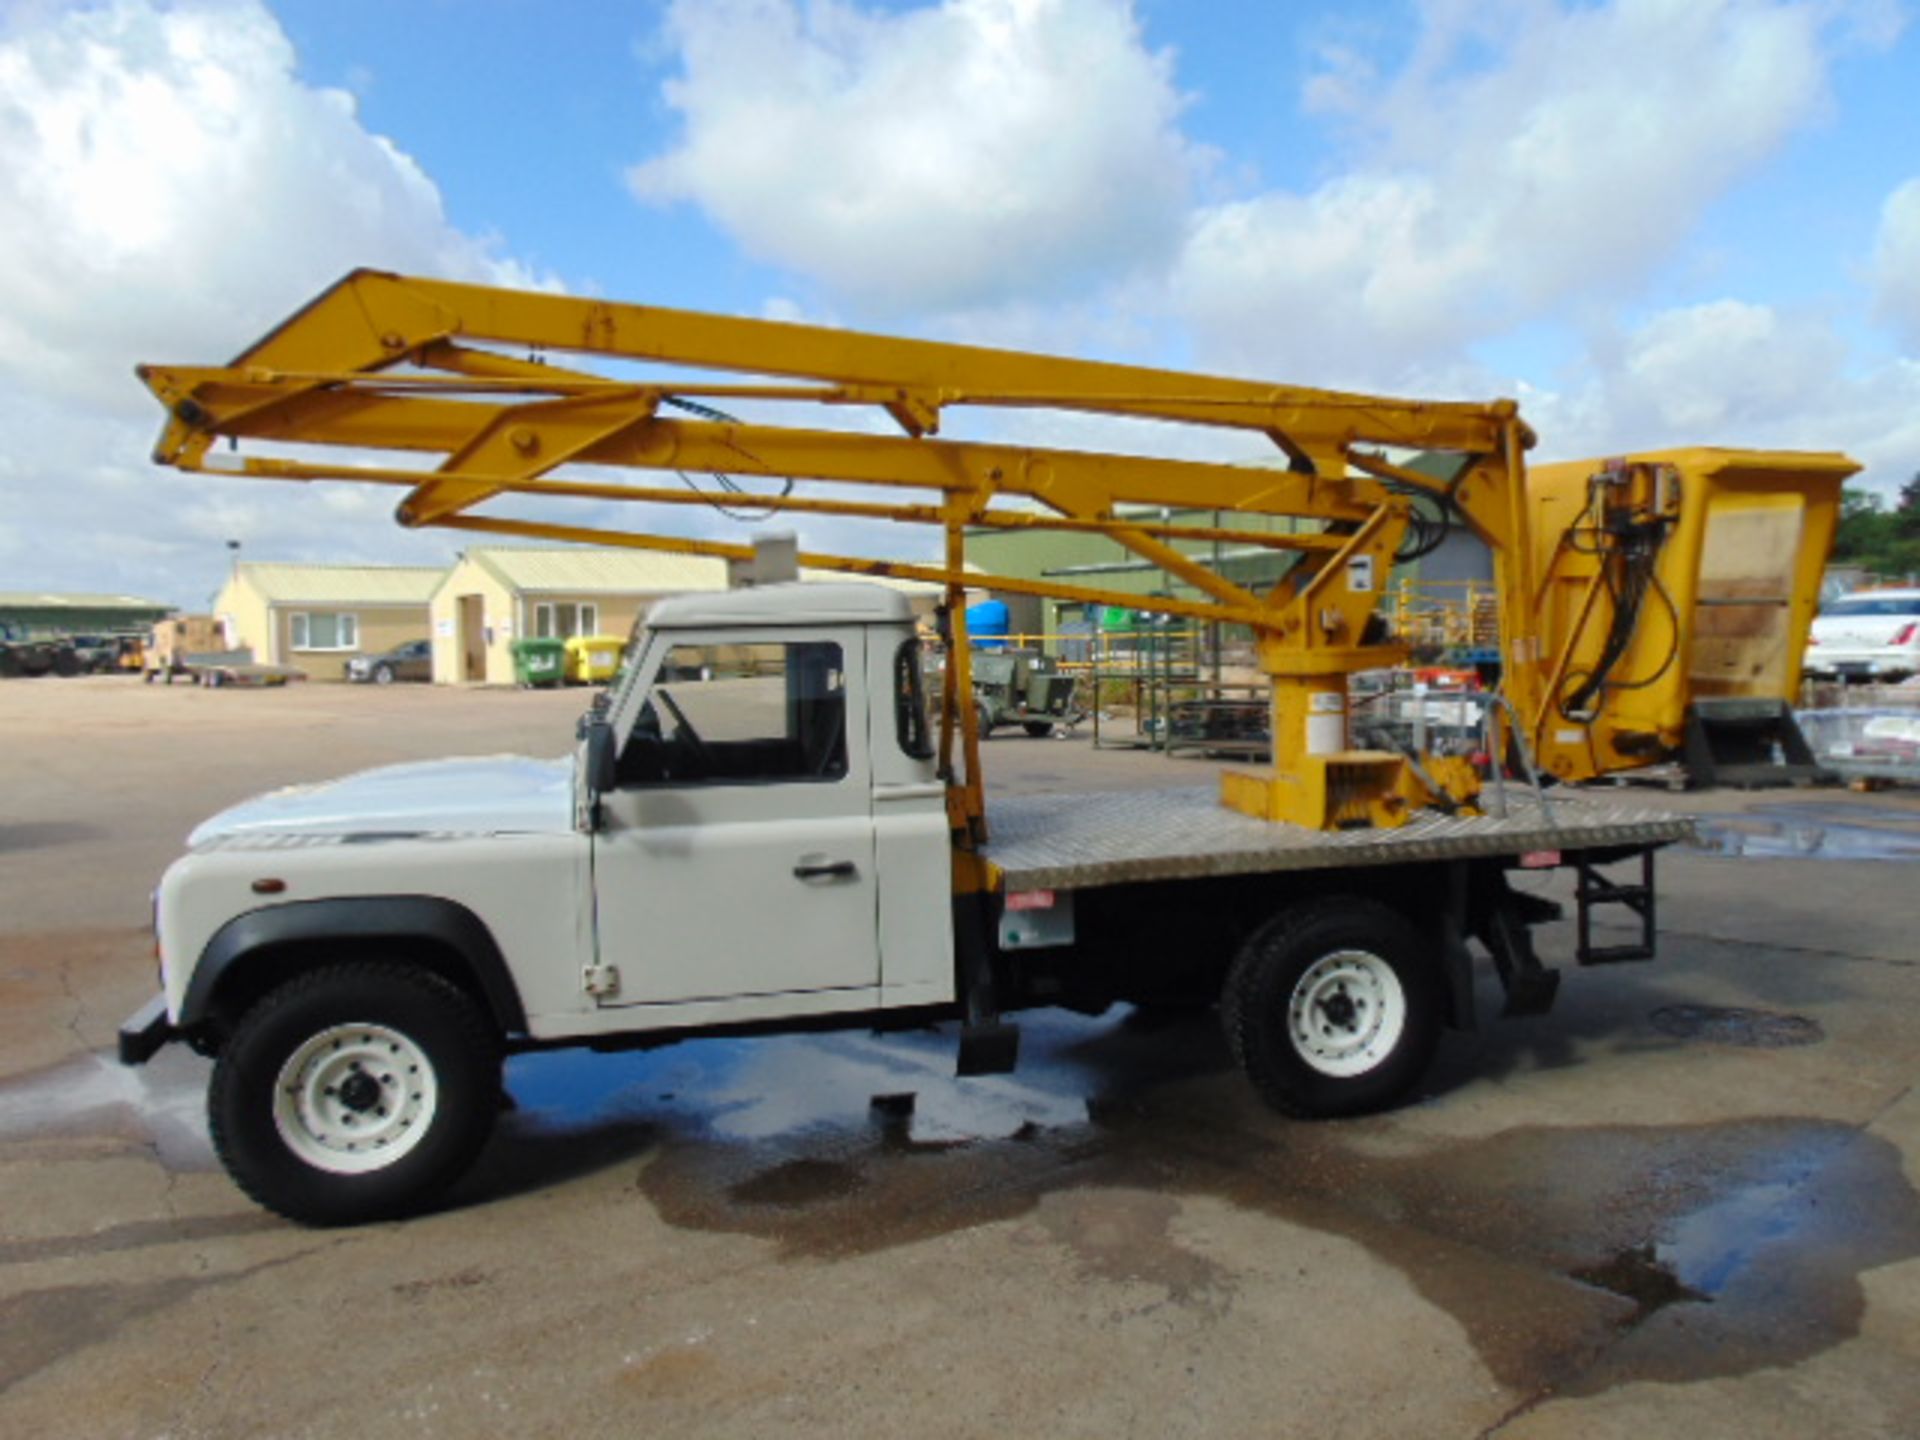 2010 Land Rover Defender 130 2.4 Puma Cherry Picker / Access Lift ONLY 83,760 MILES! - Image 7 of 32